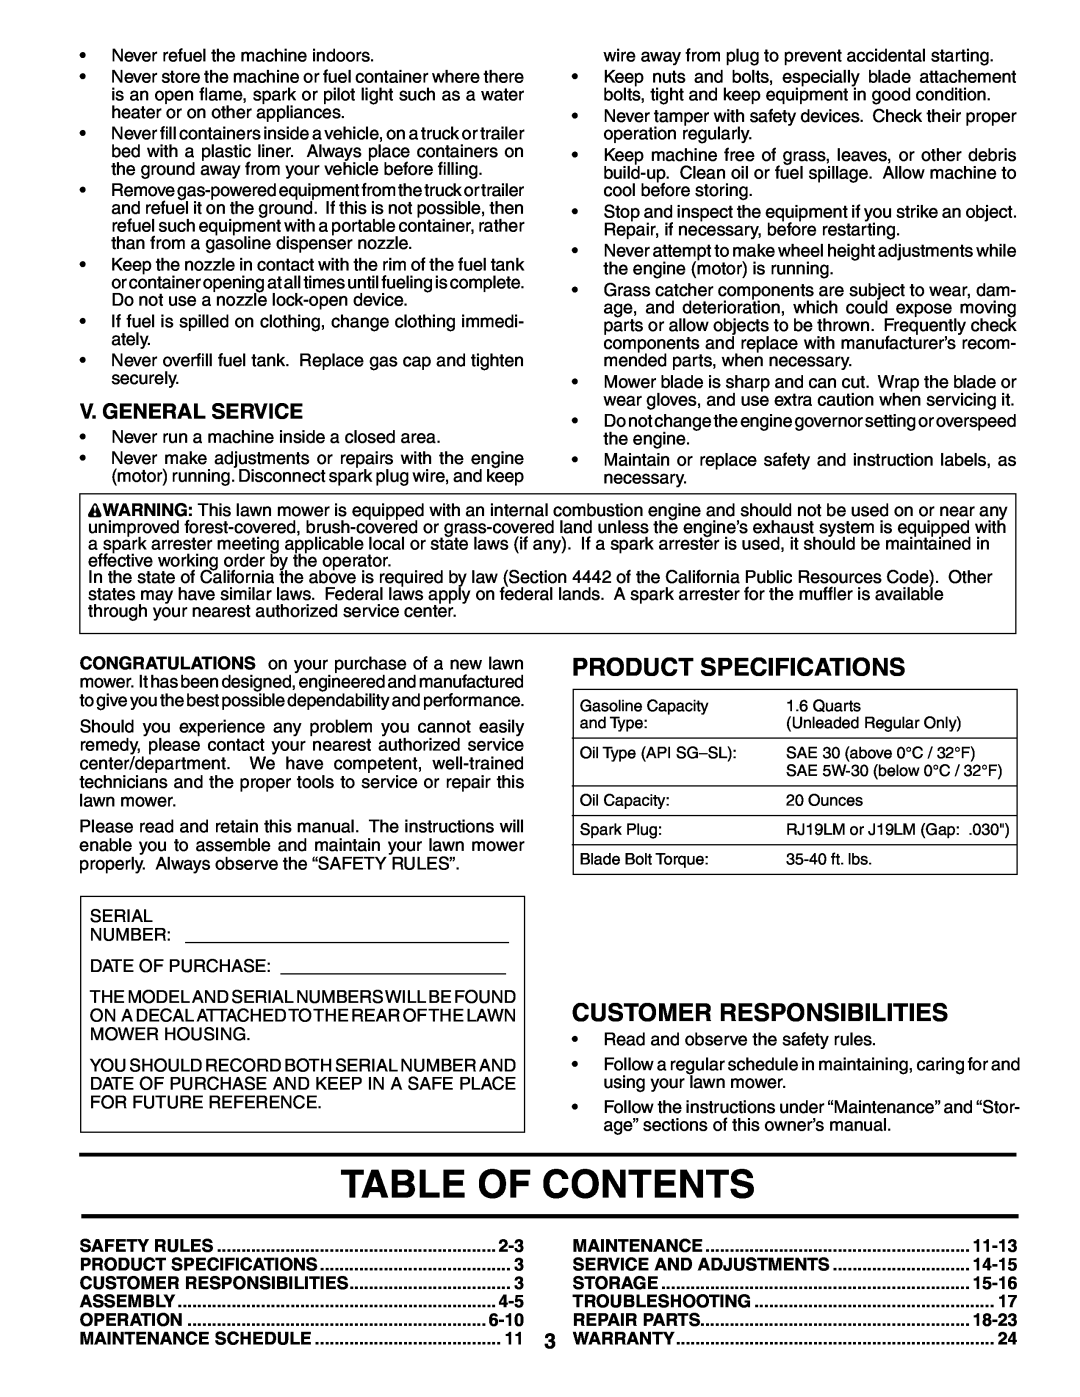 Husqvarna 67521 HV Table Of Contents, Product Specifications, Customer Responsibilities, V. General Service, 6-10, 11-13 